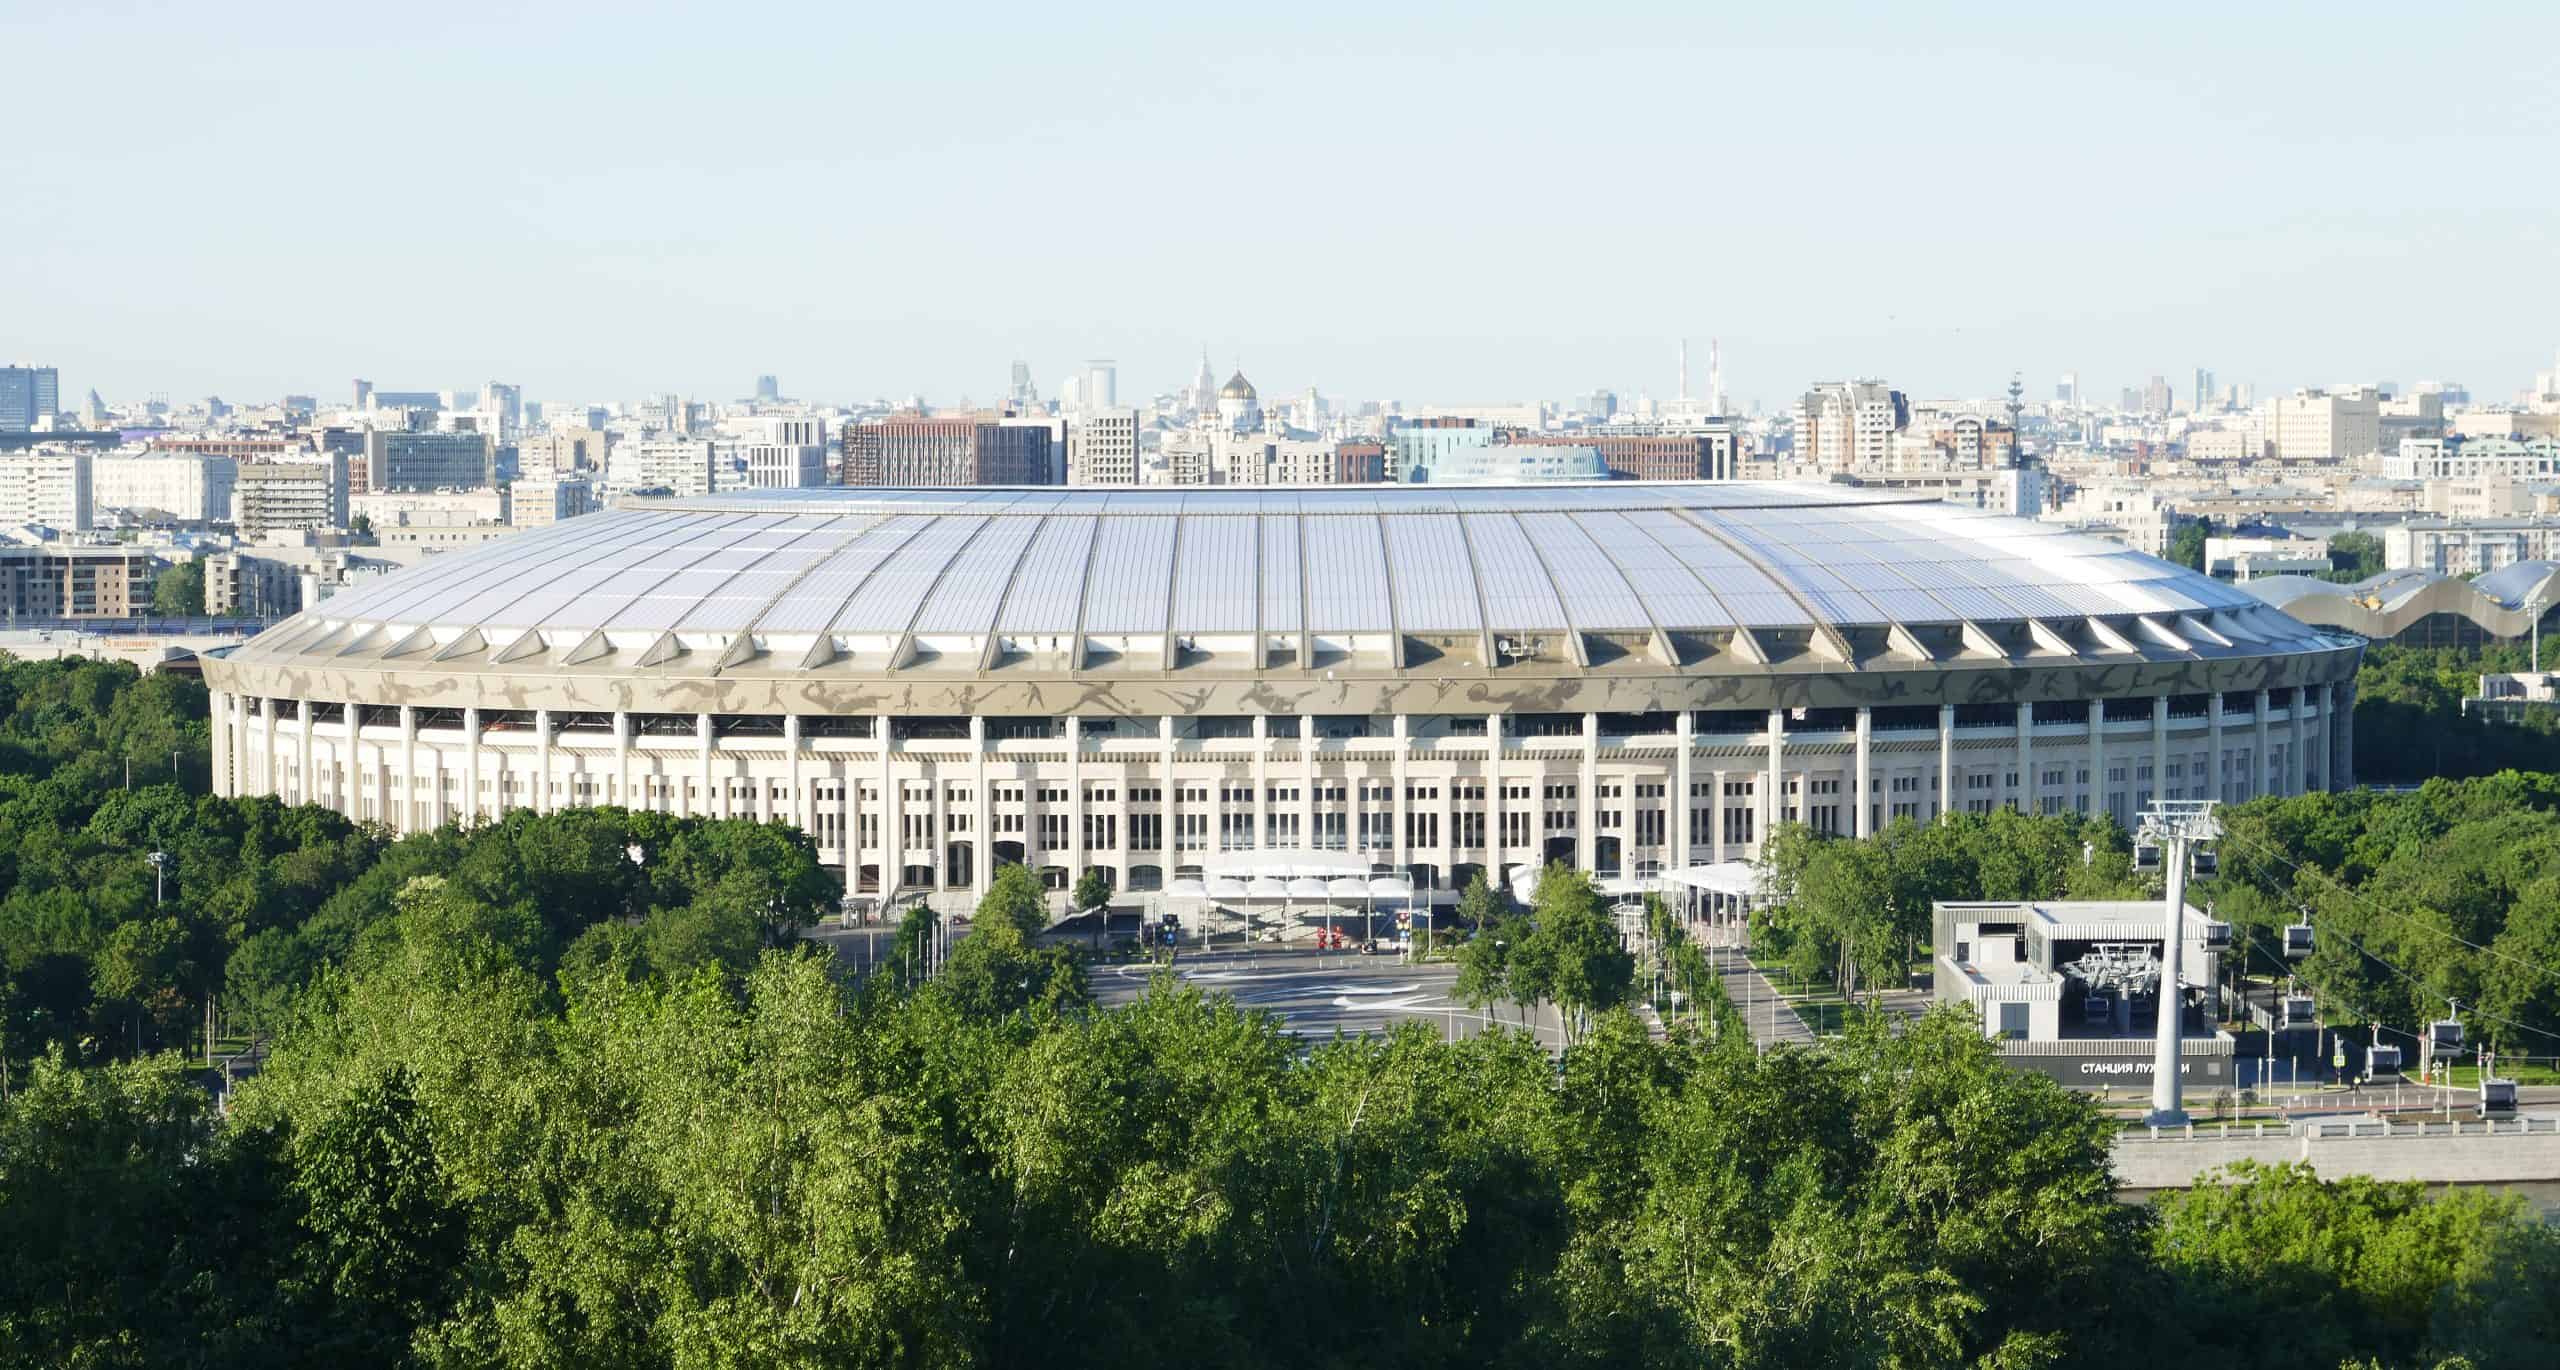 <p><strong>Year Construction Began:</strong> 1955</p>    <p><strong>Construction Completion:</strong> 1956</p>    <p>Luzhniki Stadium is the national stadium of Russia and the largest football stadium in Russia. It is in the country’s capital, Moscow, the hub of Russian culture with museums, academic and political institutions, and theatres. </p><p>Remember to scroll up and hit the ‘Follow’ button to keep up with the newest stories from Seattle Travel on your Microsoft Start feed or MSN homepage!</p>